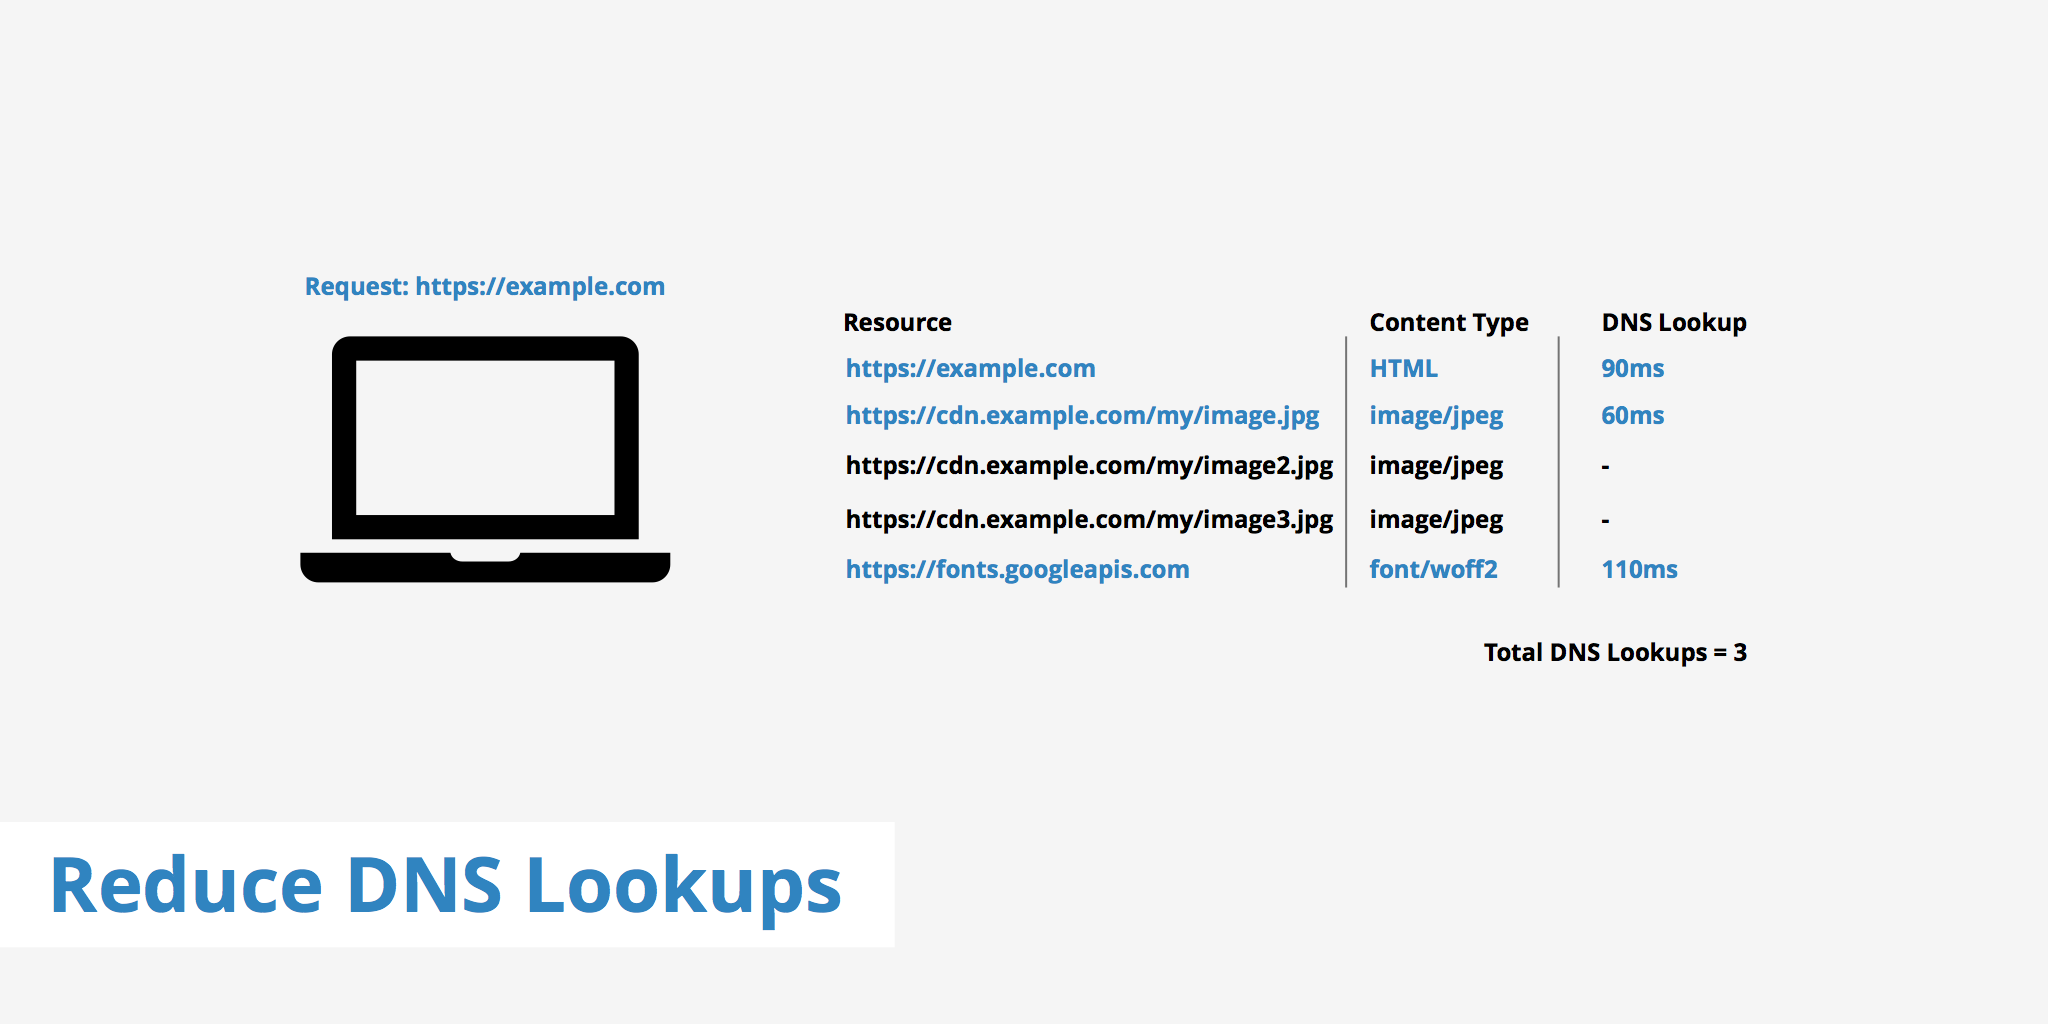 How to Reduce DNS Lookups